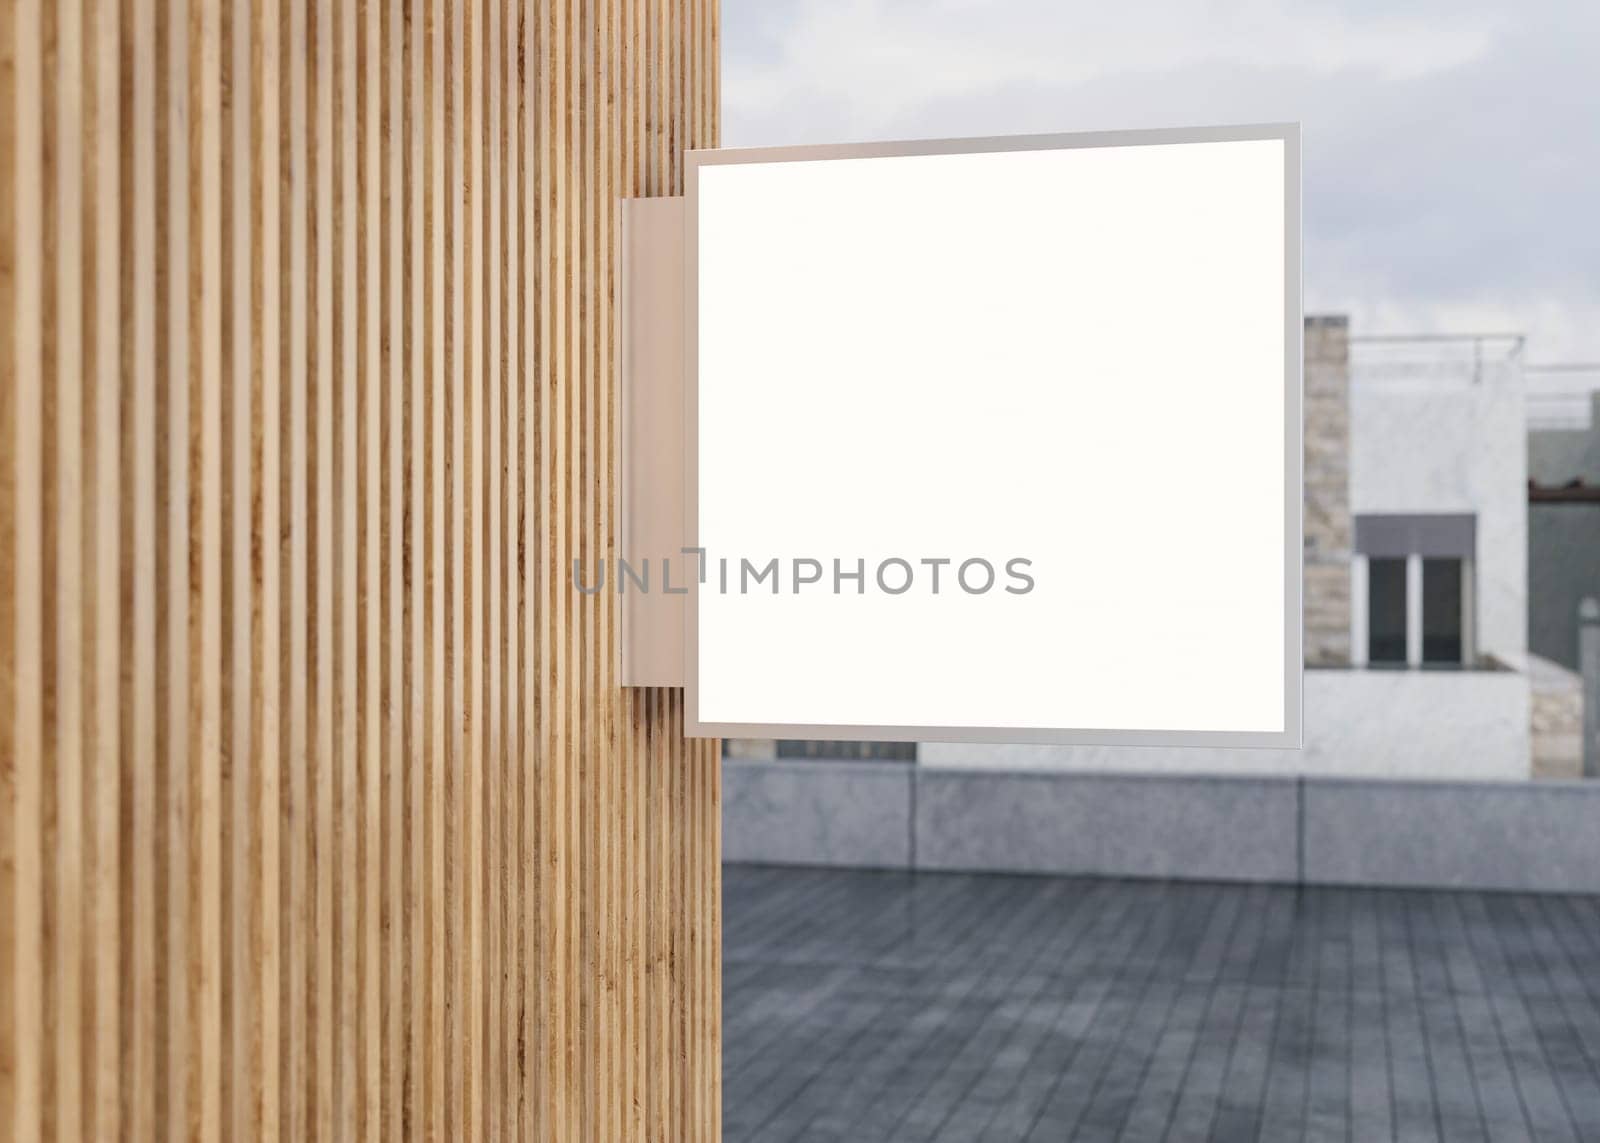 A sleek white square signboard mounted on a textured wooden wall, perfect for brand display or as a mock-up in urban settings. Shop Signboard. Illuminated lightbox on the wall. 3D